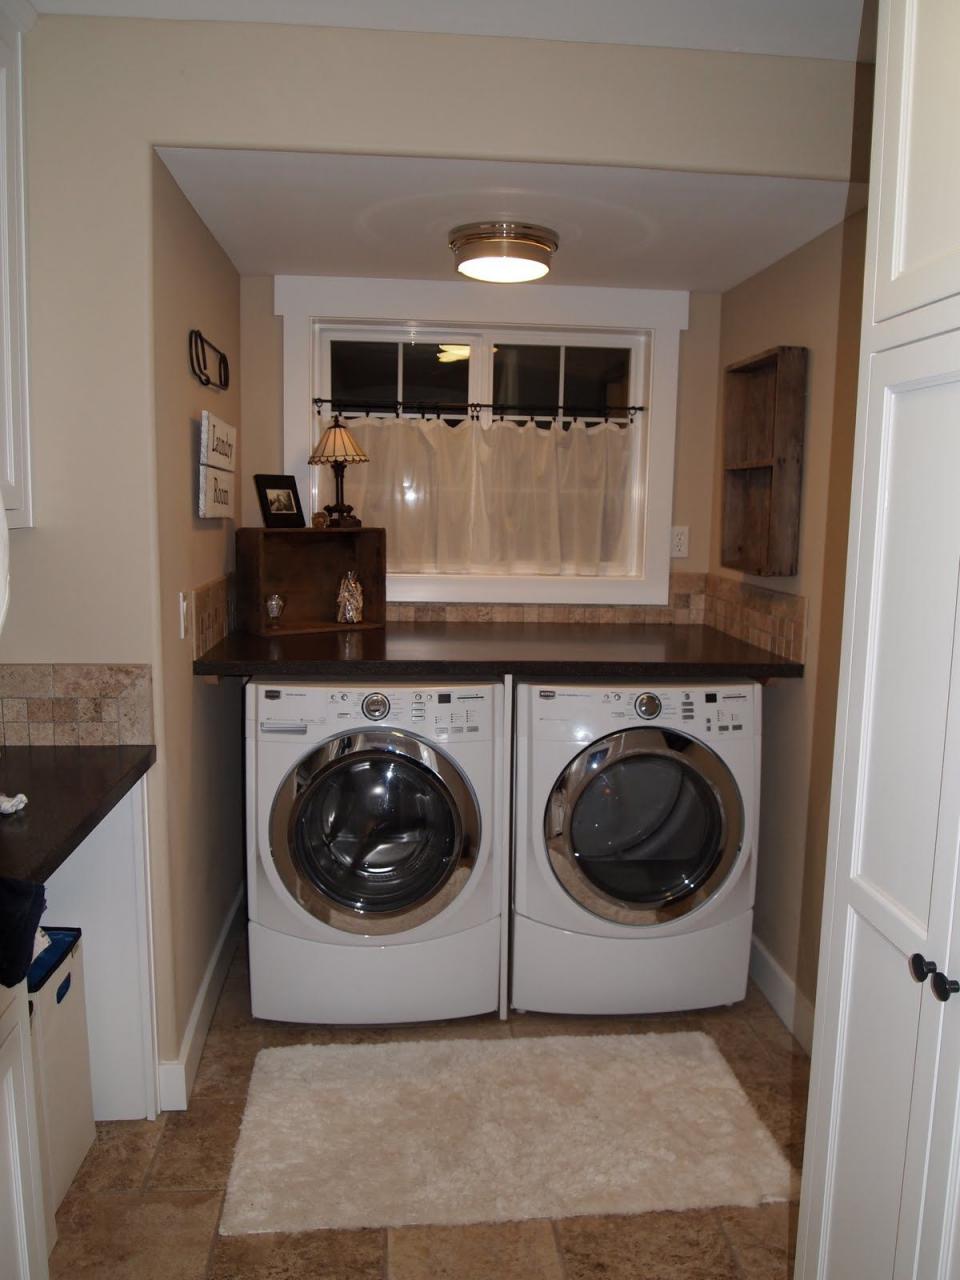 shelf over washer and dryer Laundry room ideas Pinterest Washer